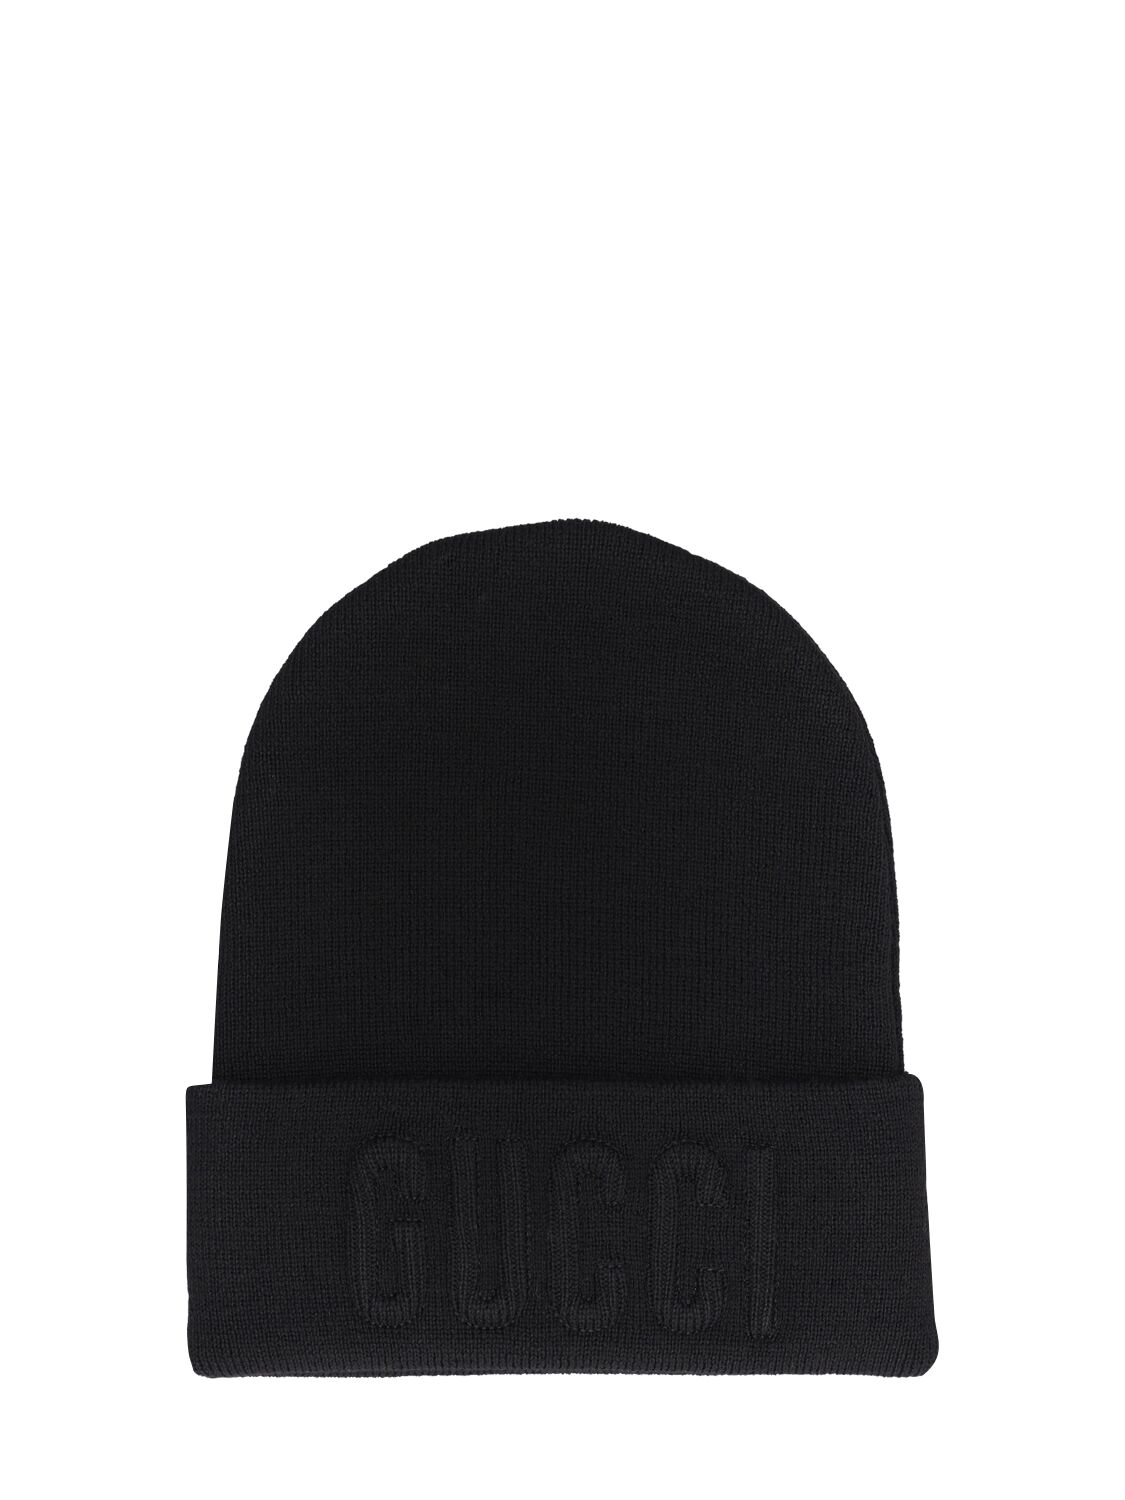 Gucci Embroidered Wool Knit Beanie In Black